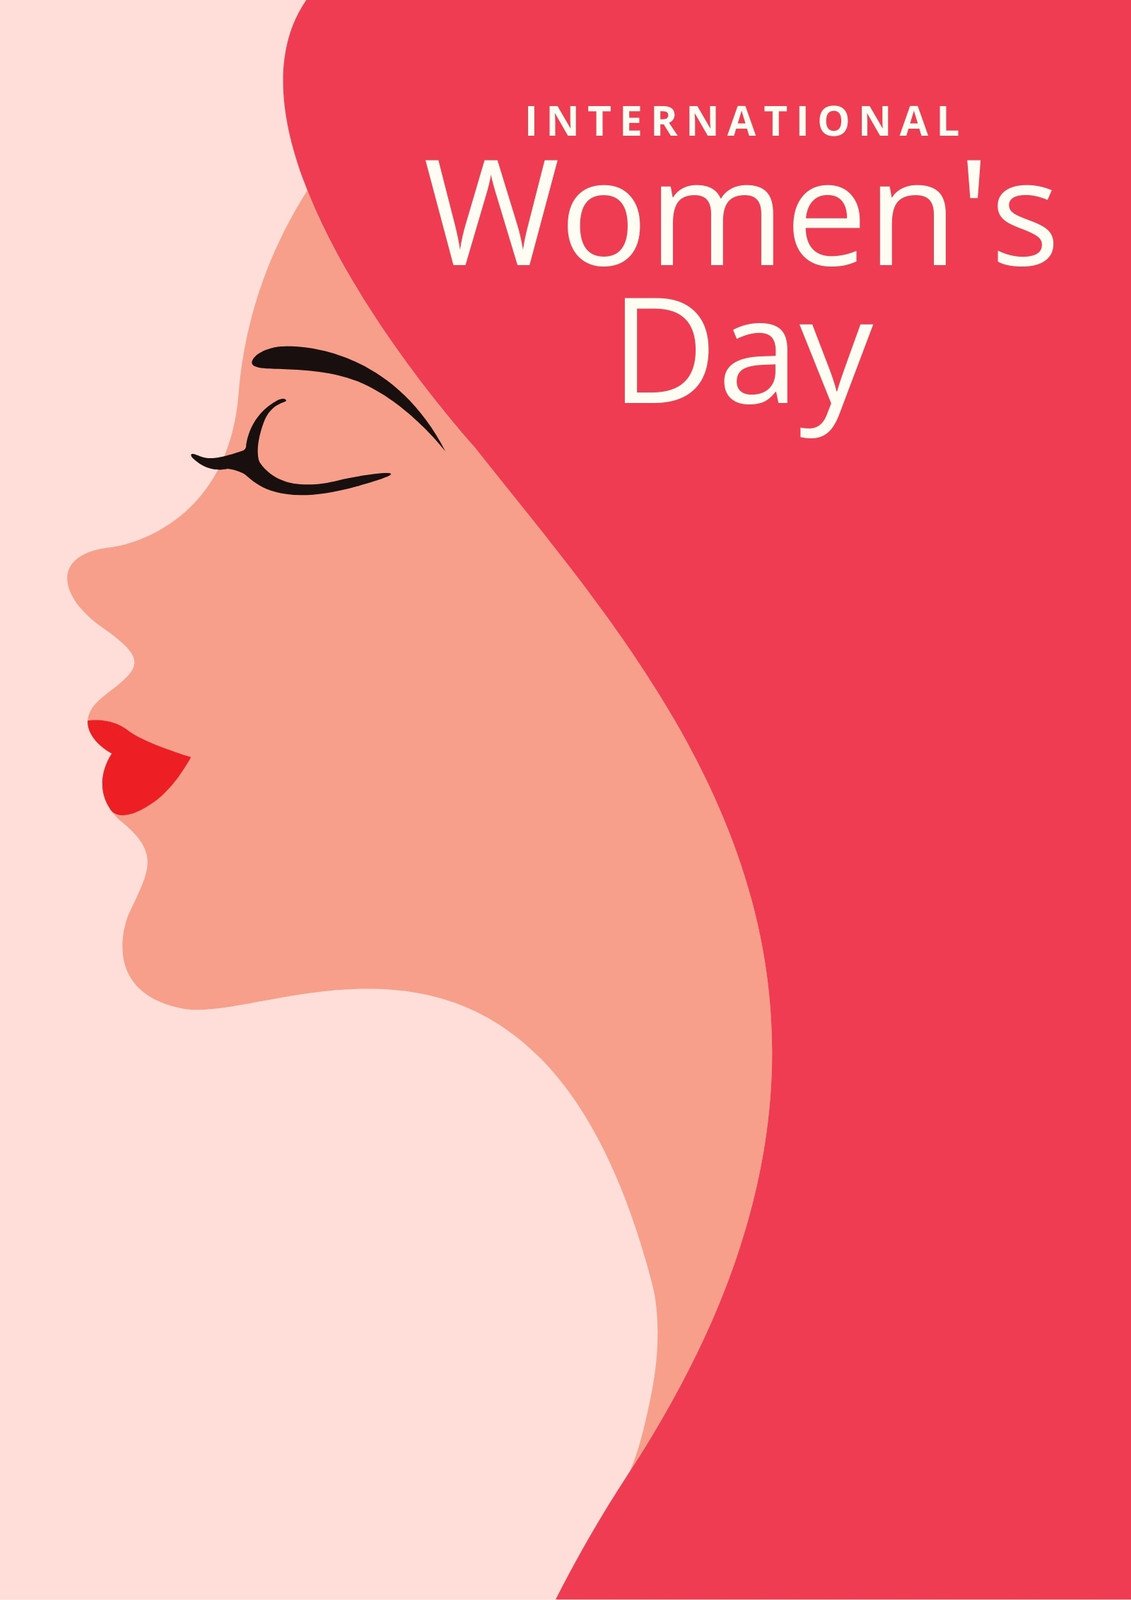 Incredible Compilation of 999+ Women's Day Poster Images in Full 4K